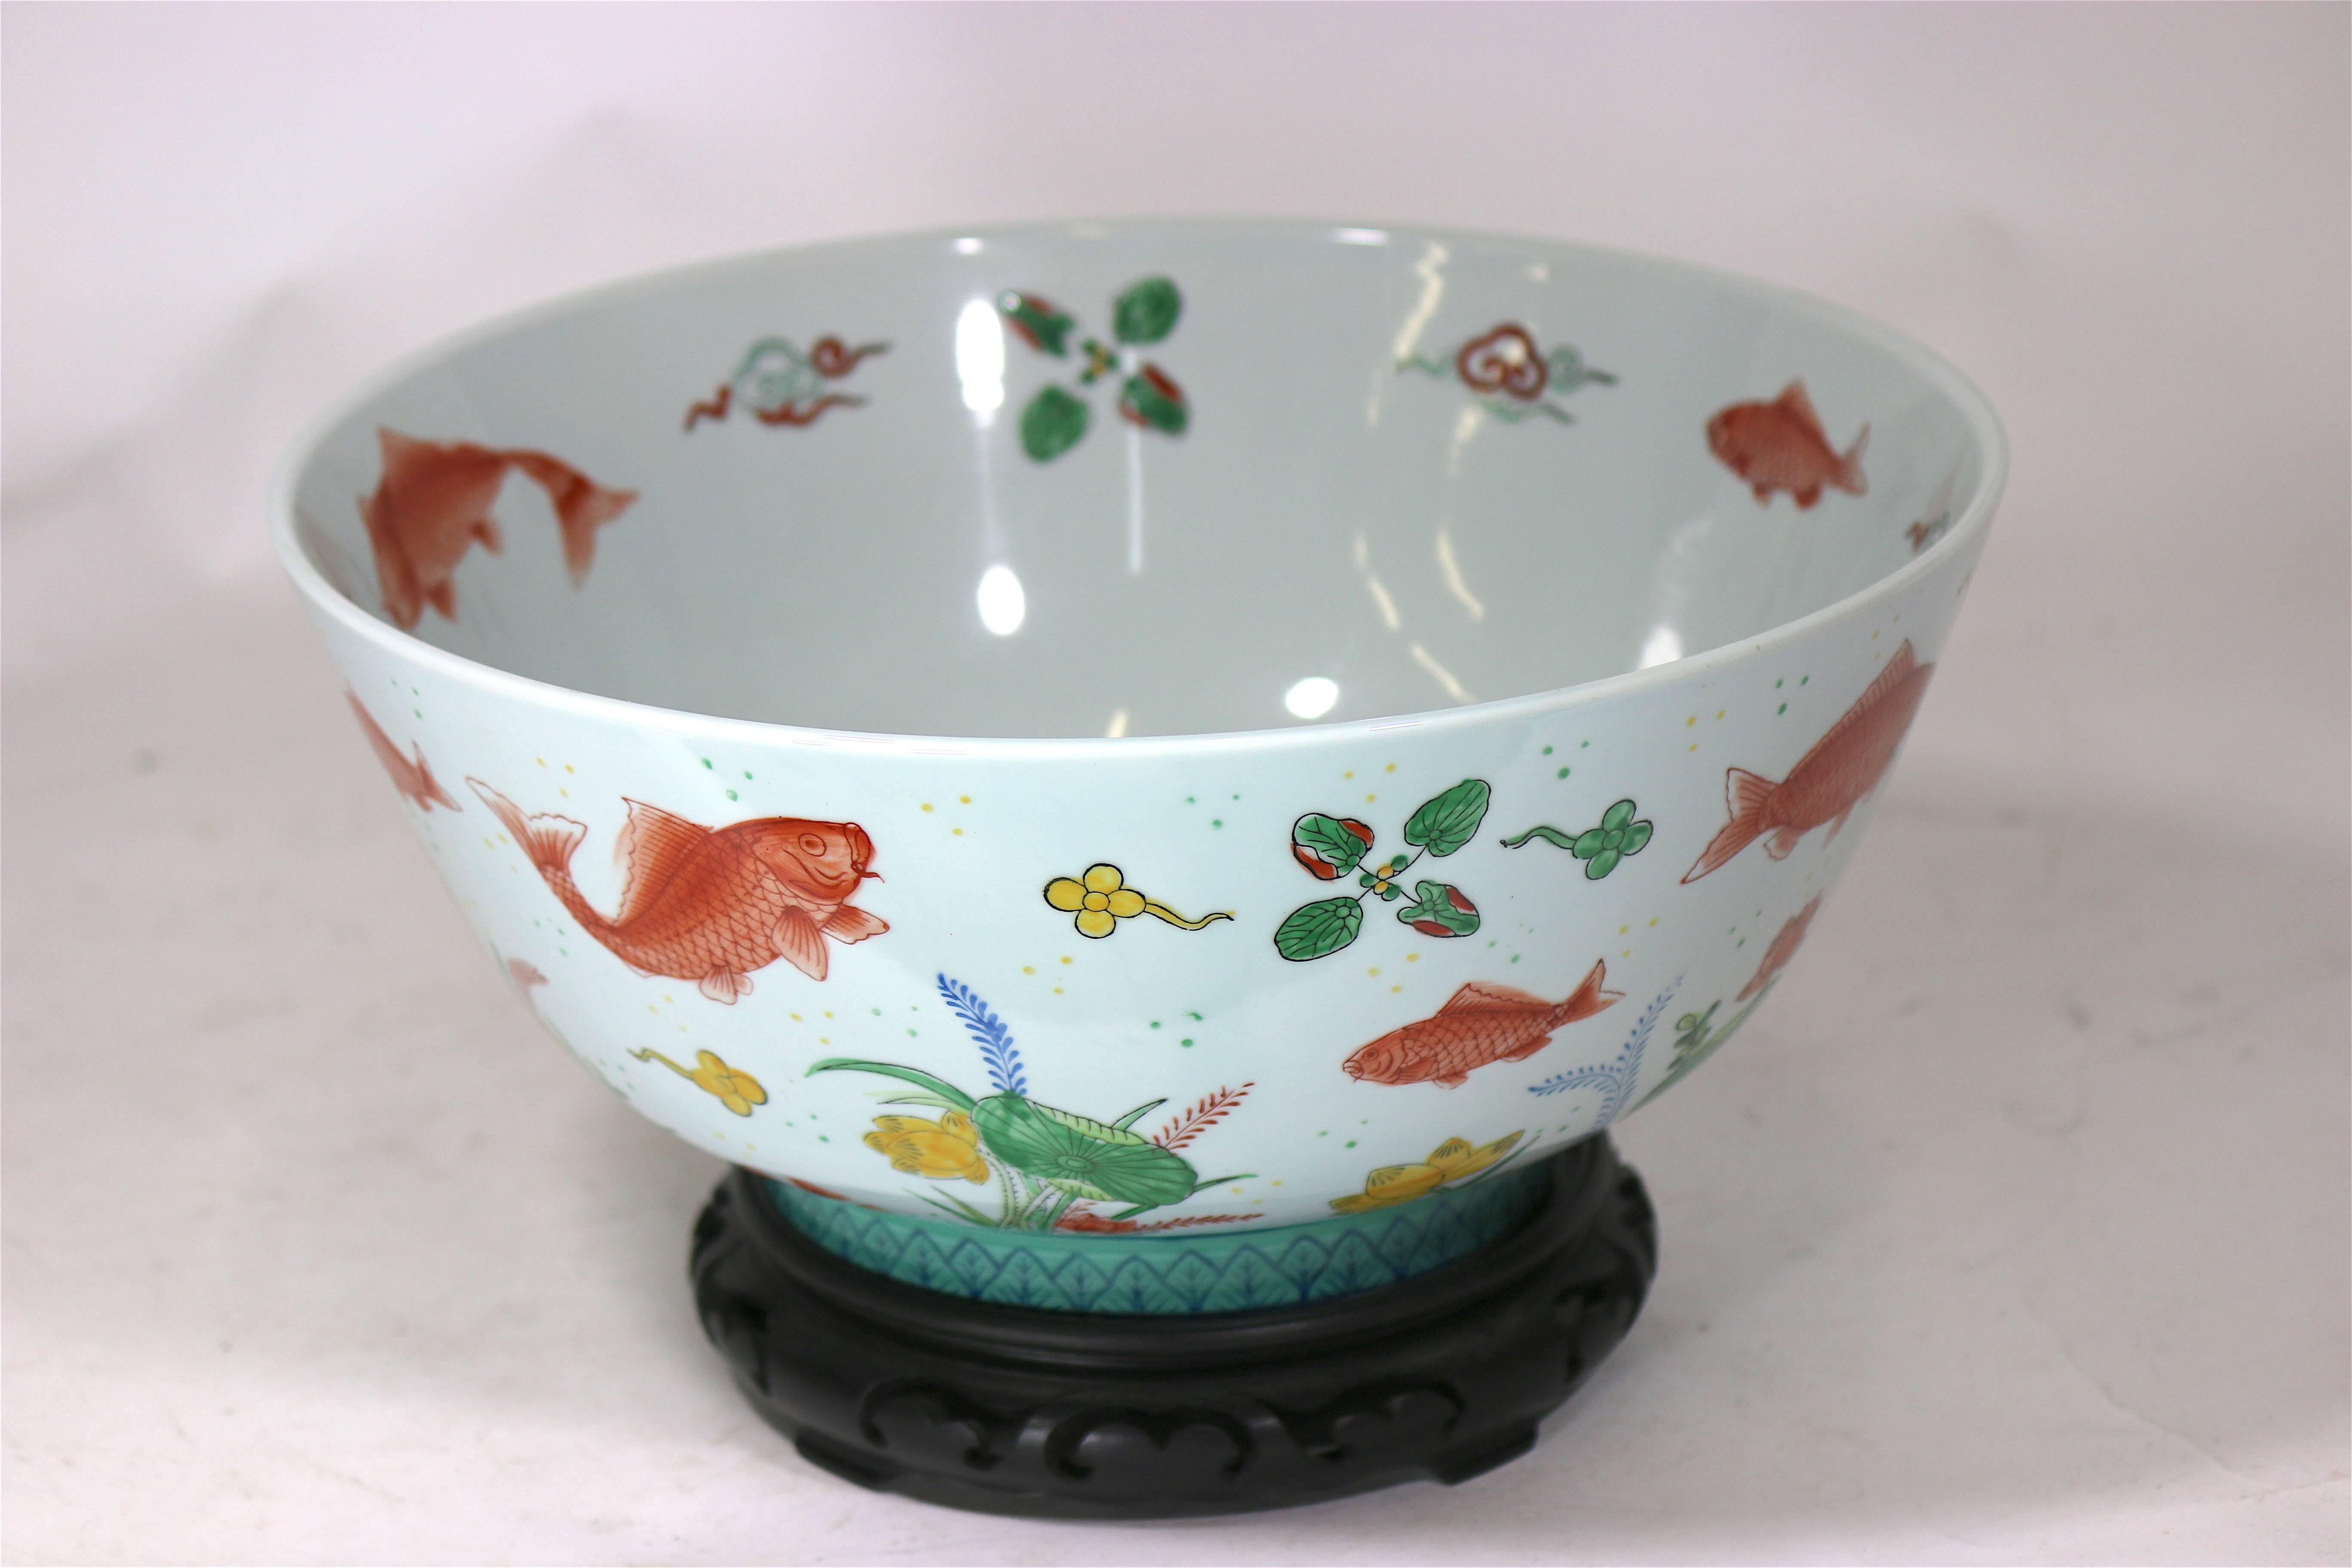 20th Century Large Centerpiece Hand-Painted Bowl- Floating Fish in Flora & Fauna